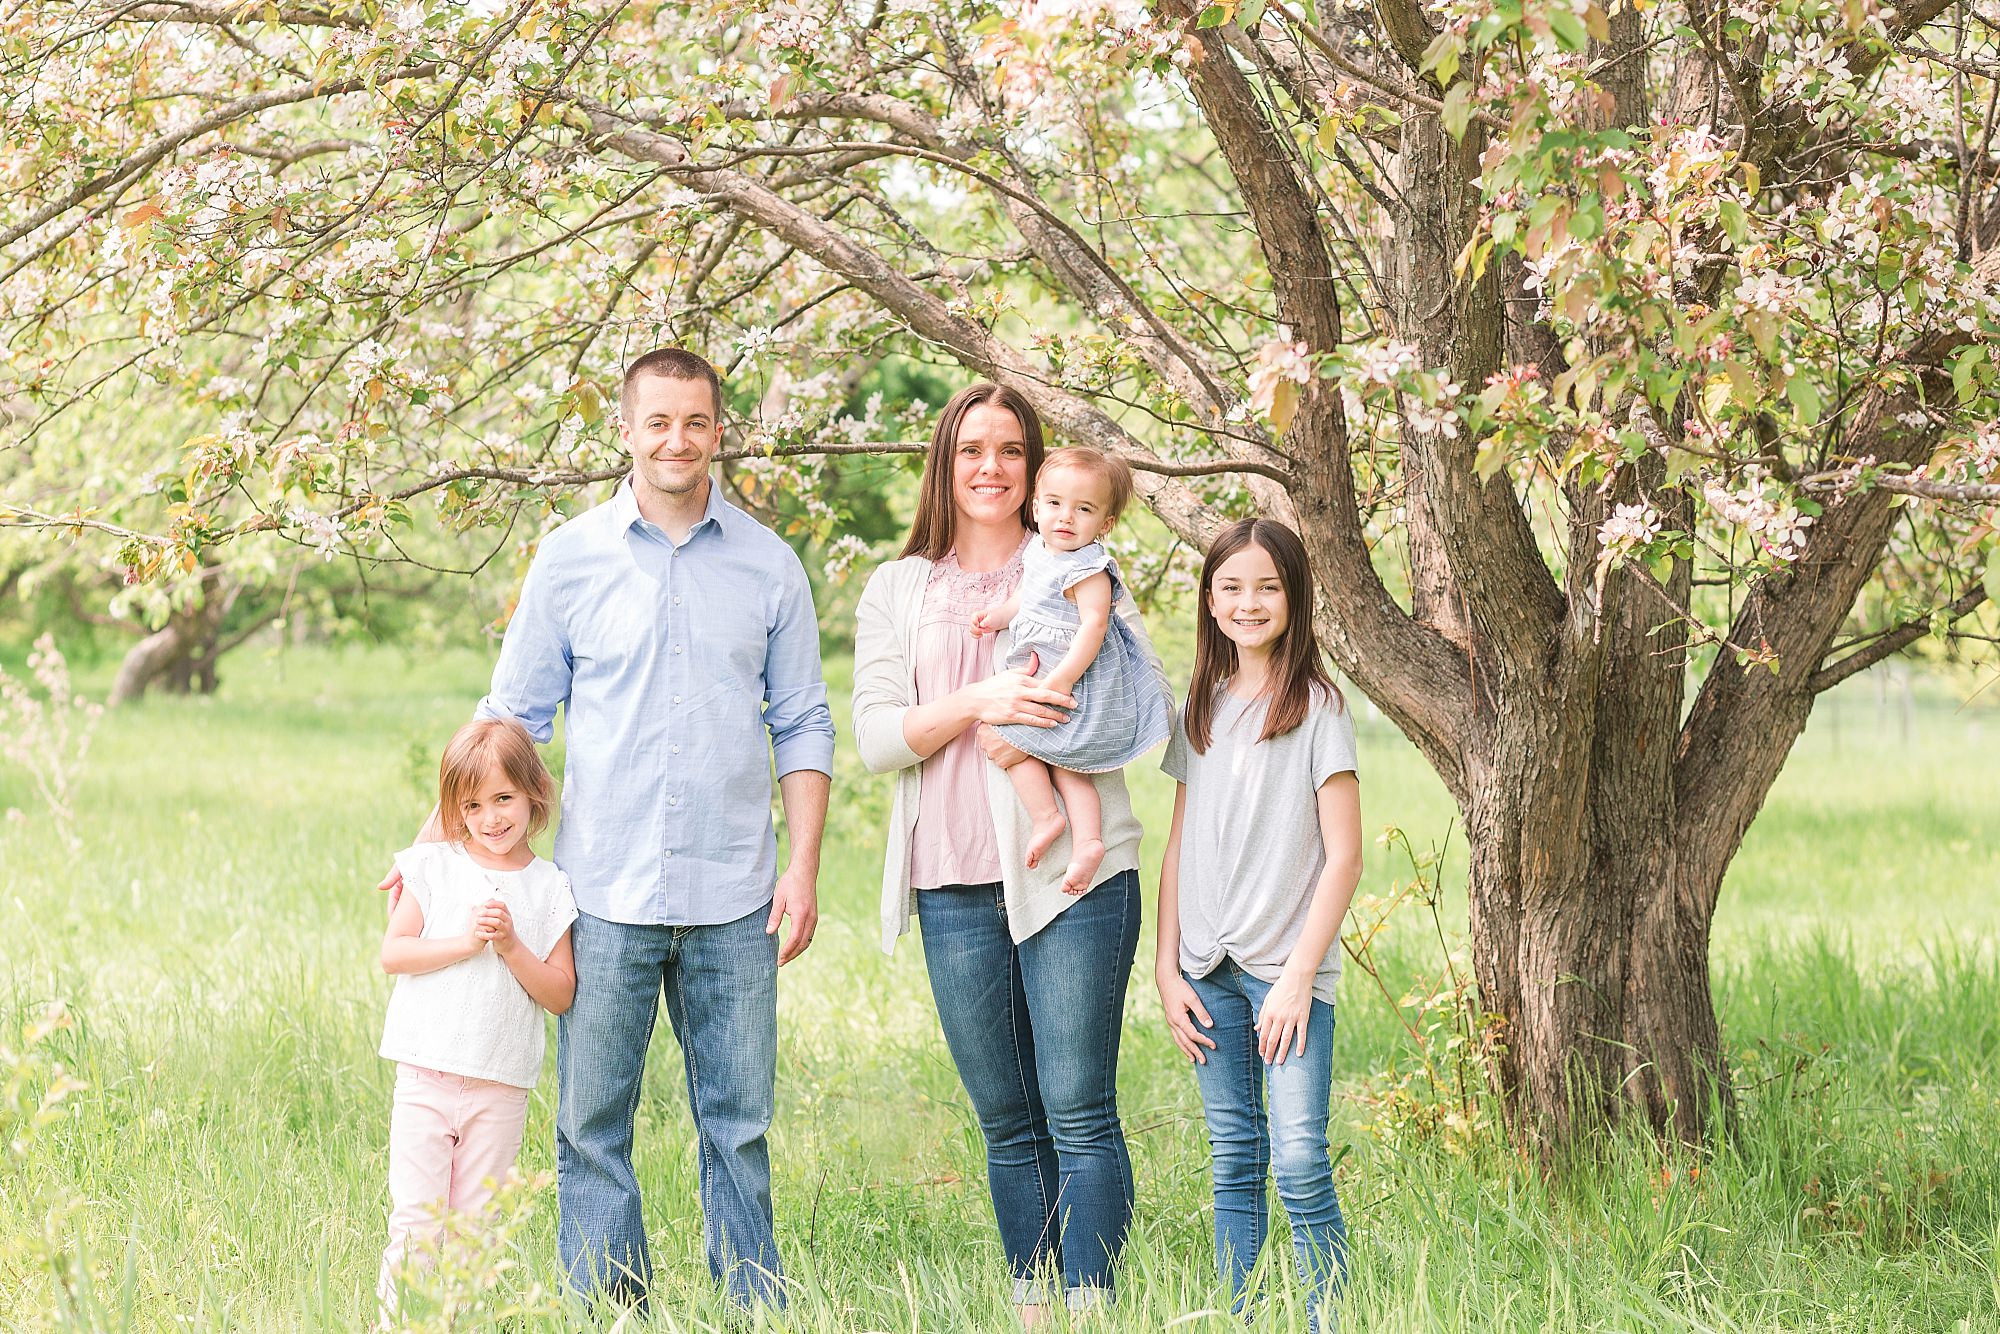 A couple smile with their three daughters for spring photos in orchard glen